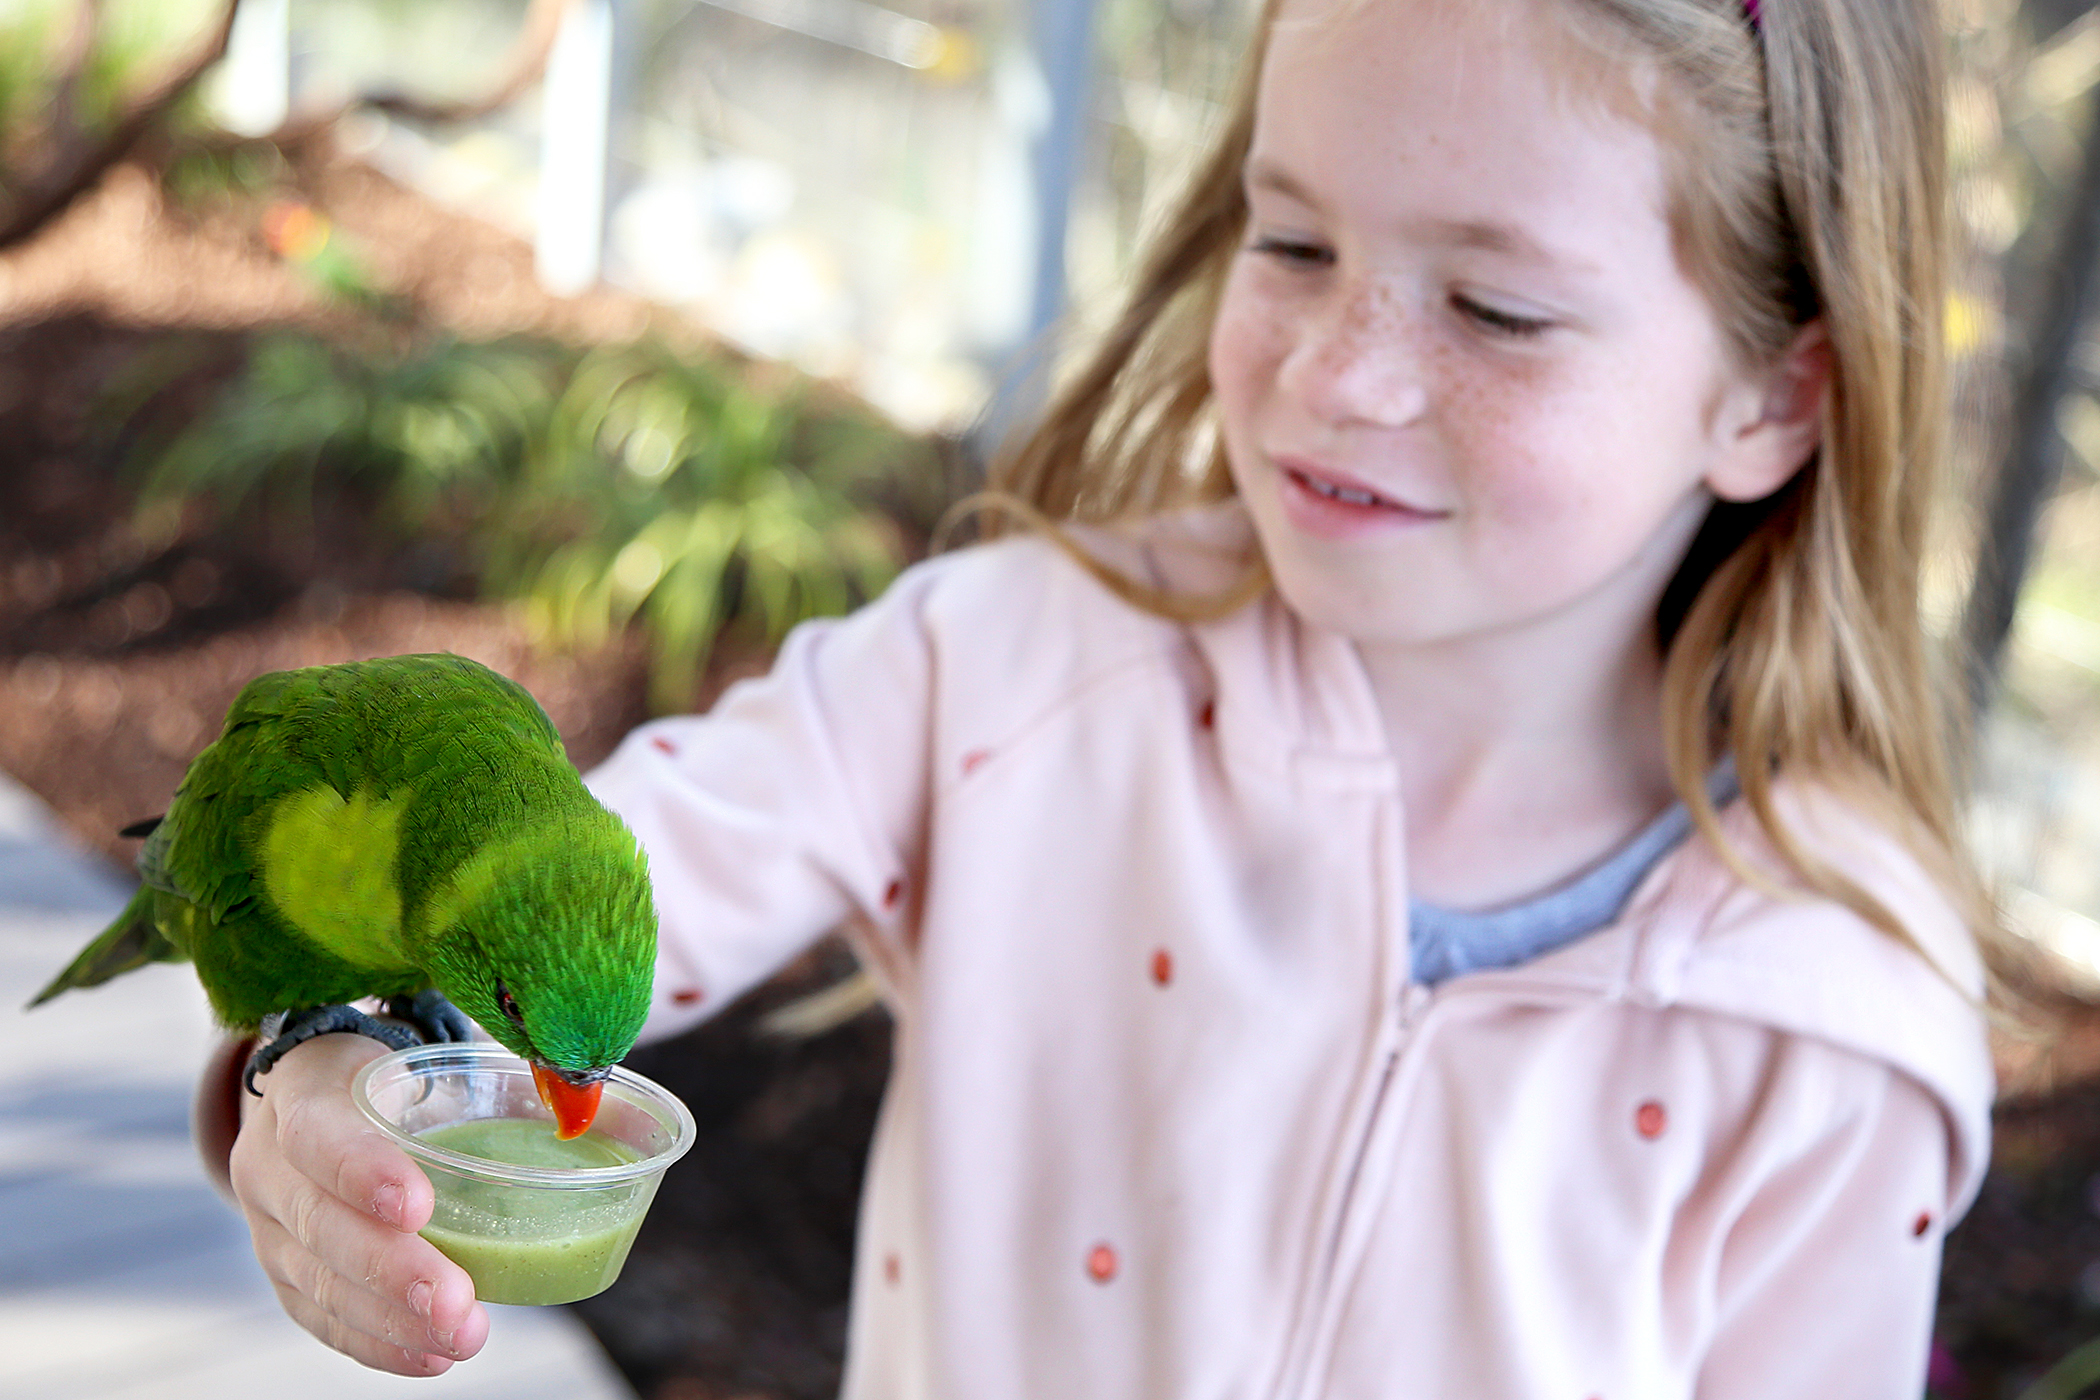 Lorikeet eats from a cup while perched on a little girl's arm at Lorikeet Landing